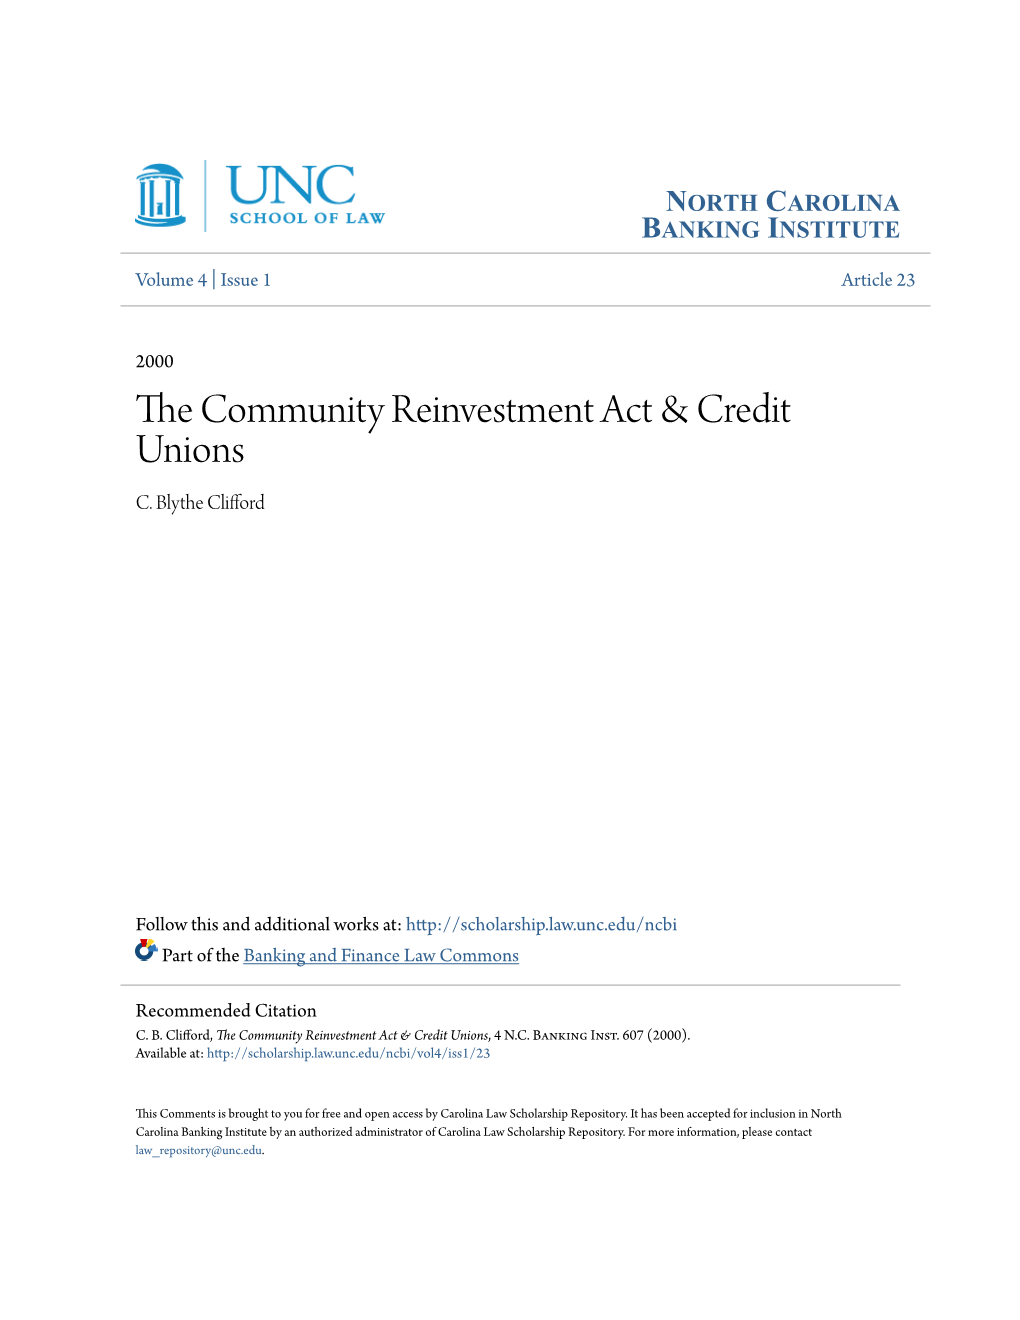 The Community Reinvestment Act & Credit Unions